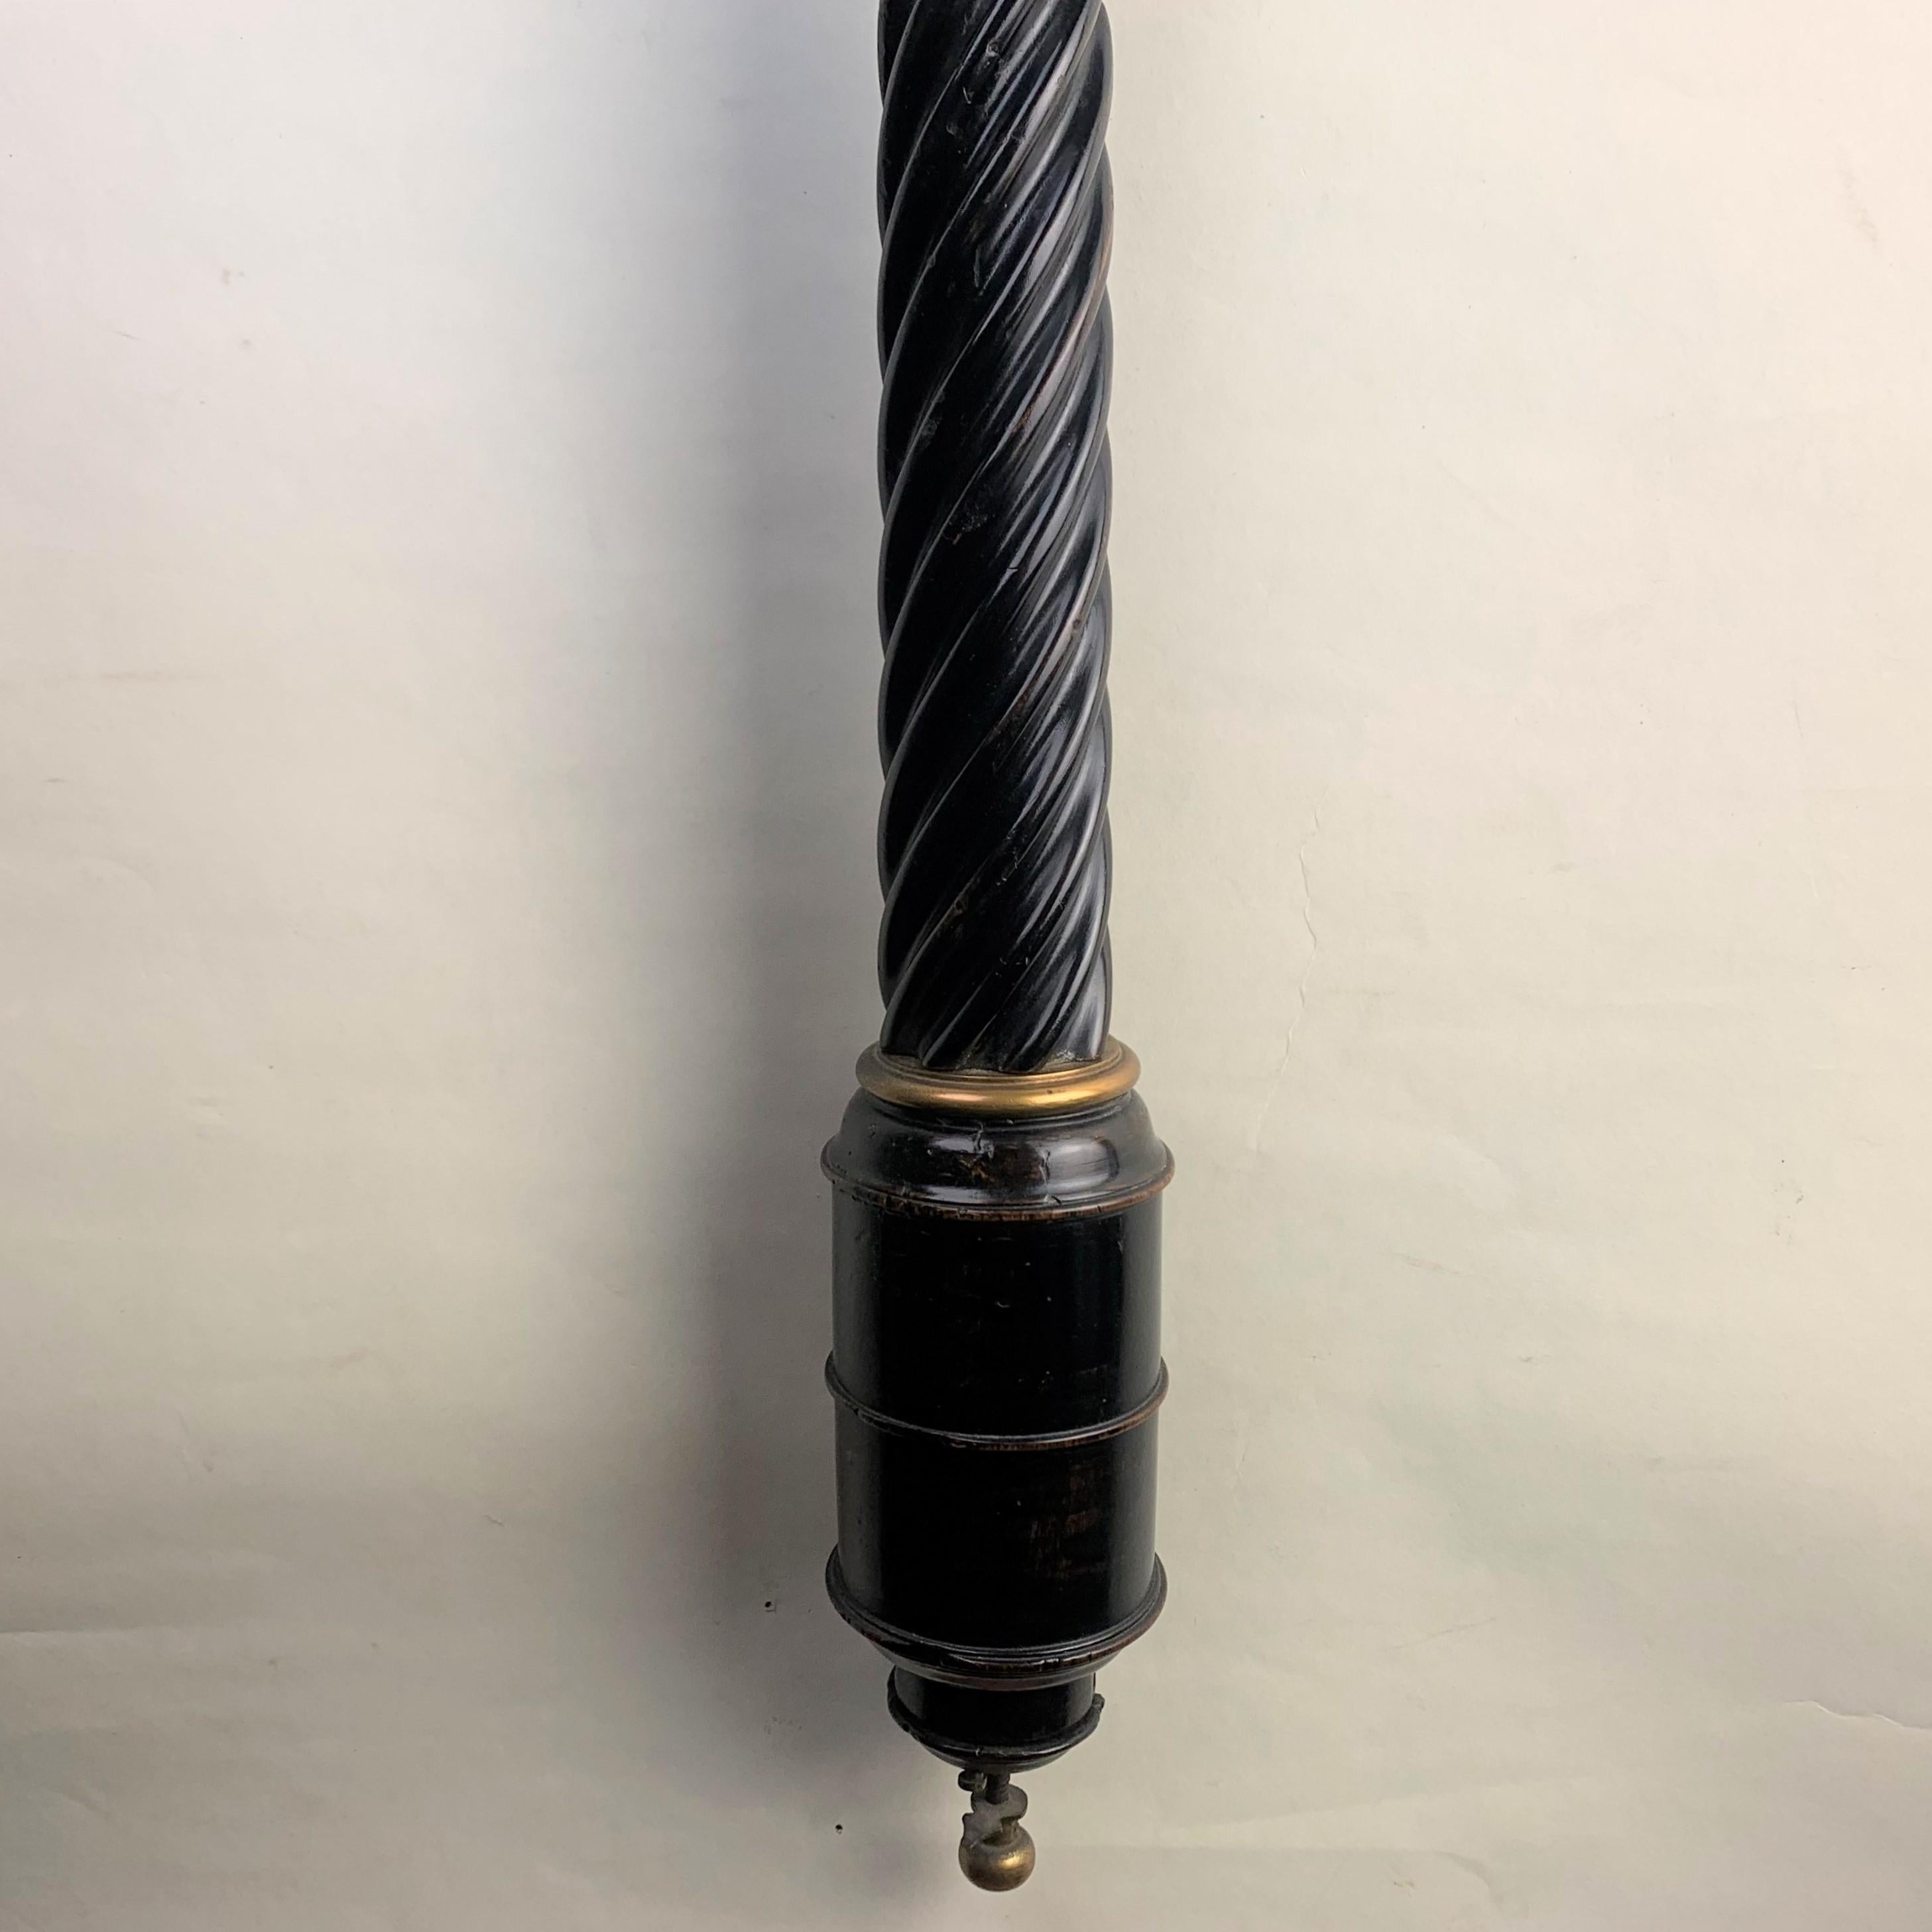 A rare unsigned ebonised fruitwood and brass-mounted siphon tube barometer. The barrel-shaped cistern base has the brass adjustment knob in the base and a gilt-brass collet at the top joining it to the spiral section with a further brass collet,